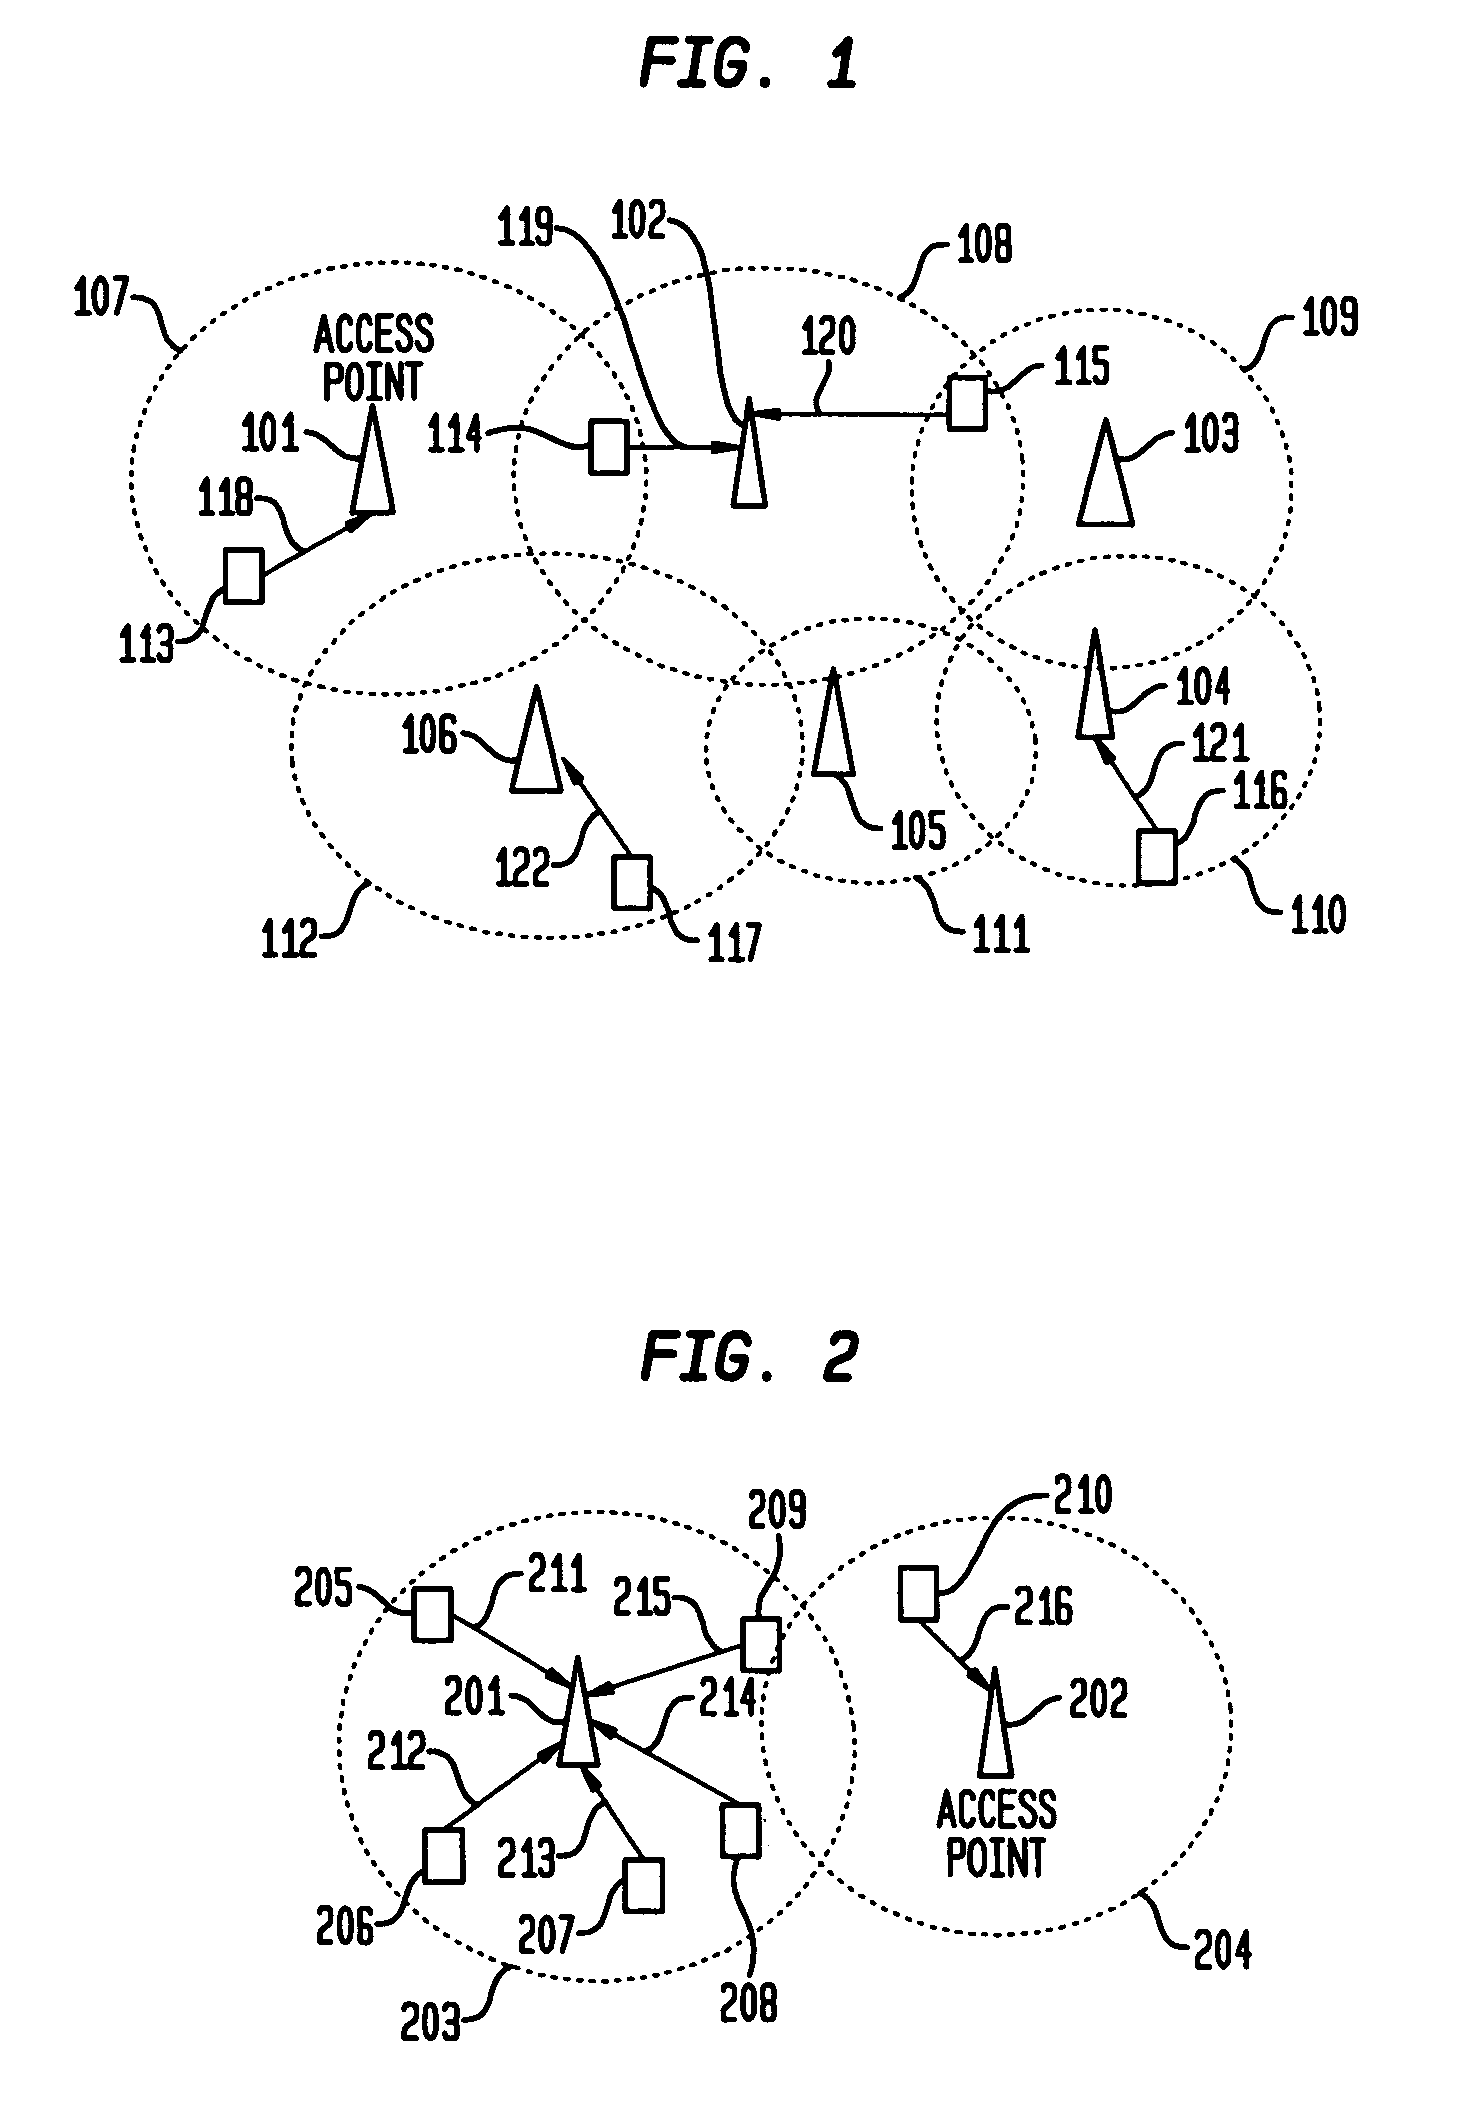 Method and apparatus for load sharing in wireless access networks based on dynamic transmission power adjustment of access points